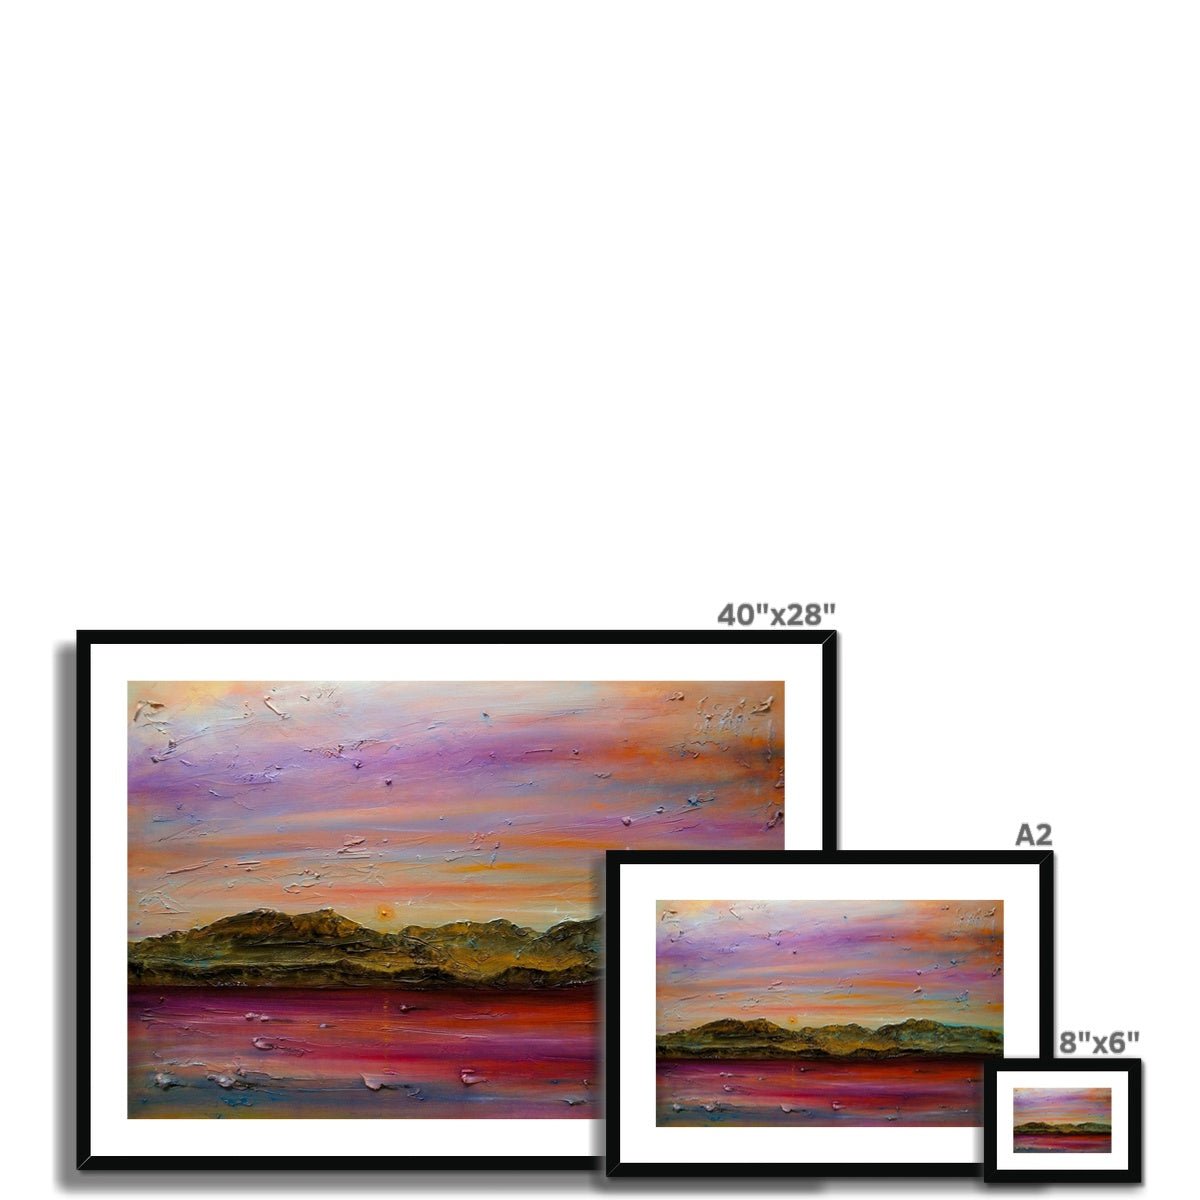 Arran Autumn Dusk Painting | Framed & Mounted Prints From Scotland-Framed & Mounted Prints-Arran Art Gallery-Paintings, Prints, Homeware, Art Gifts From Scotland By Scottish Artist Kevin Hunter